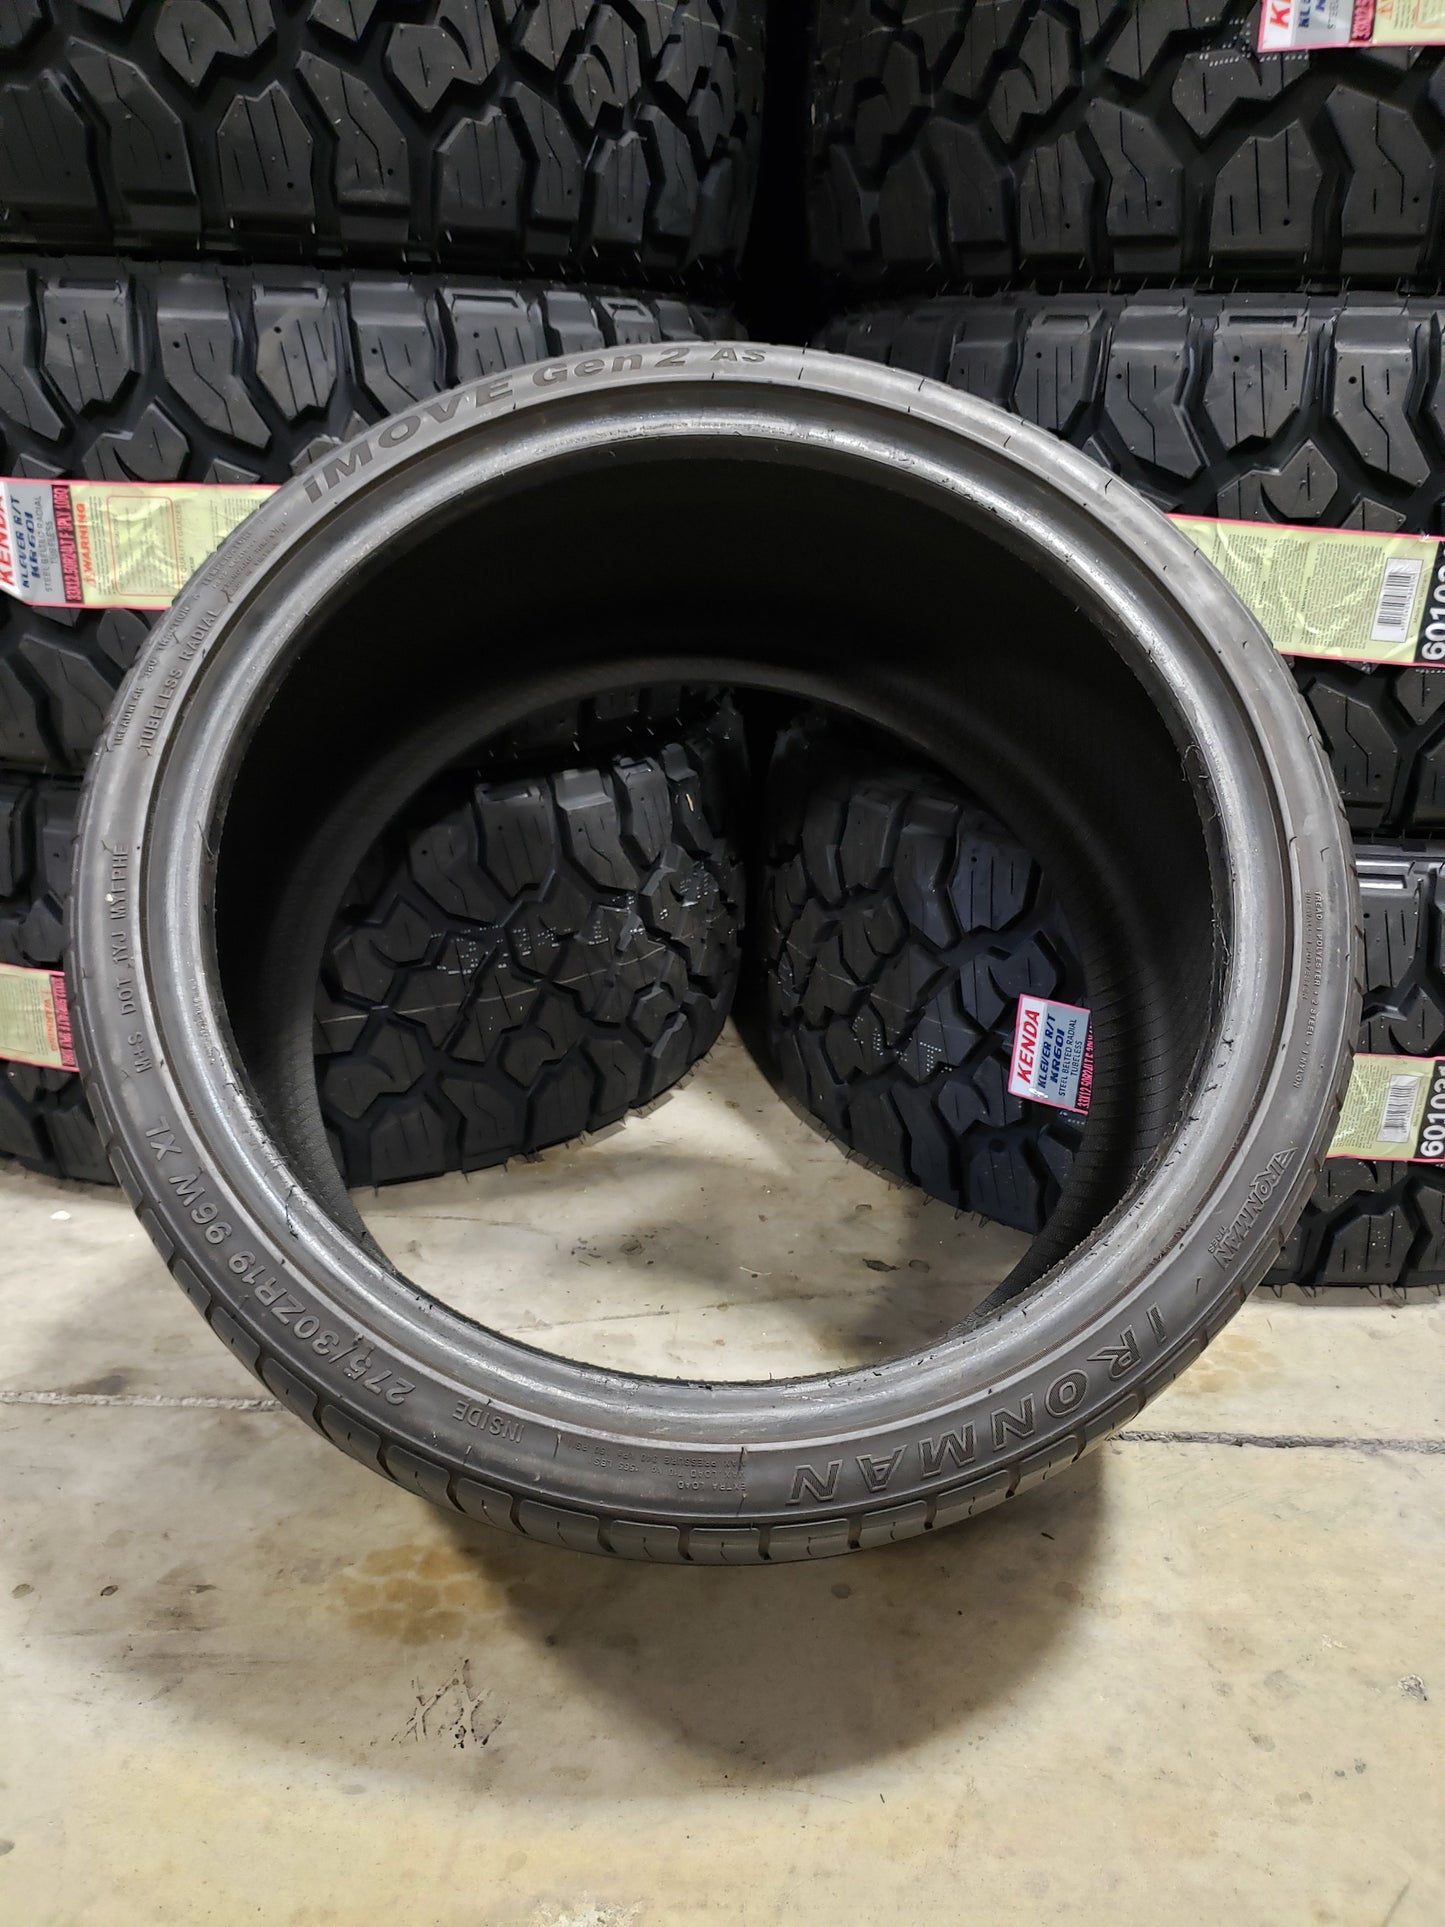 SINGLE 275/30R19 IronMan iMove GEN 2 AS 96 XL - Used Tires